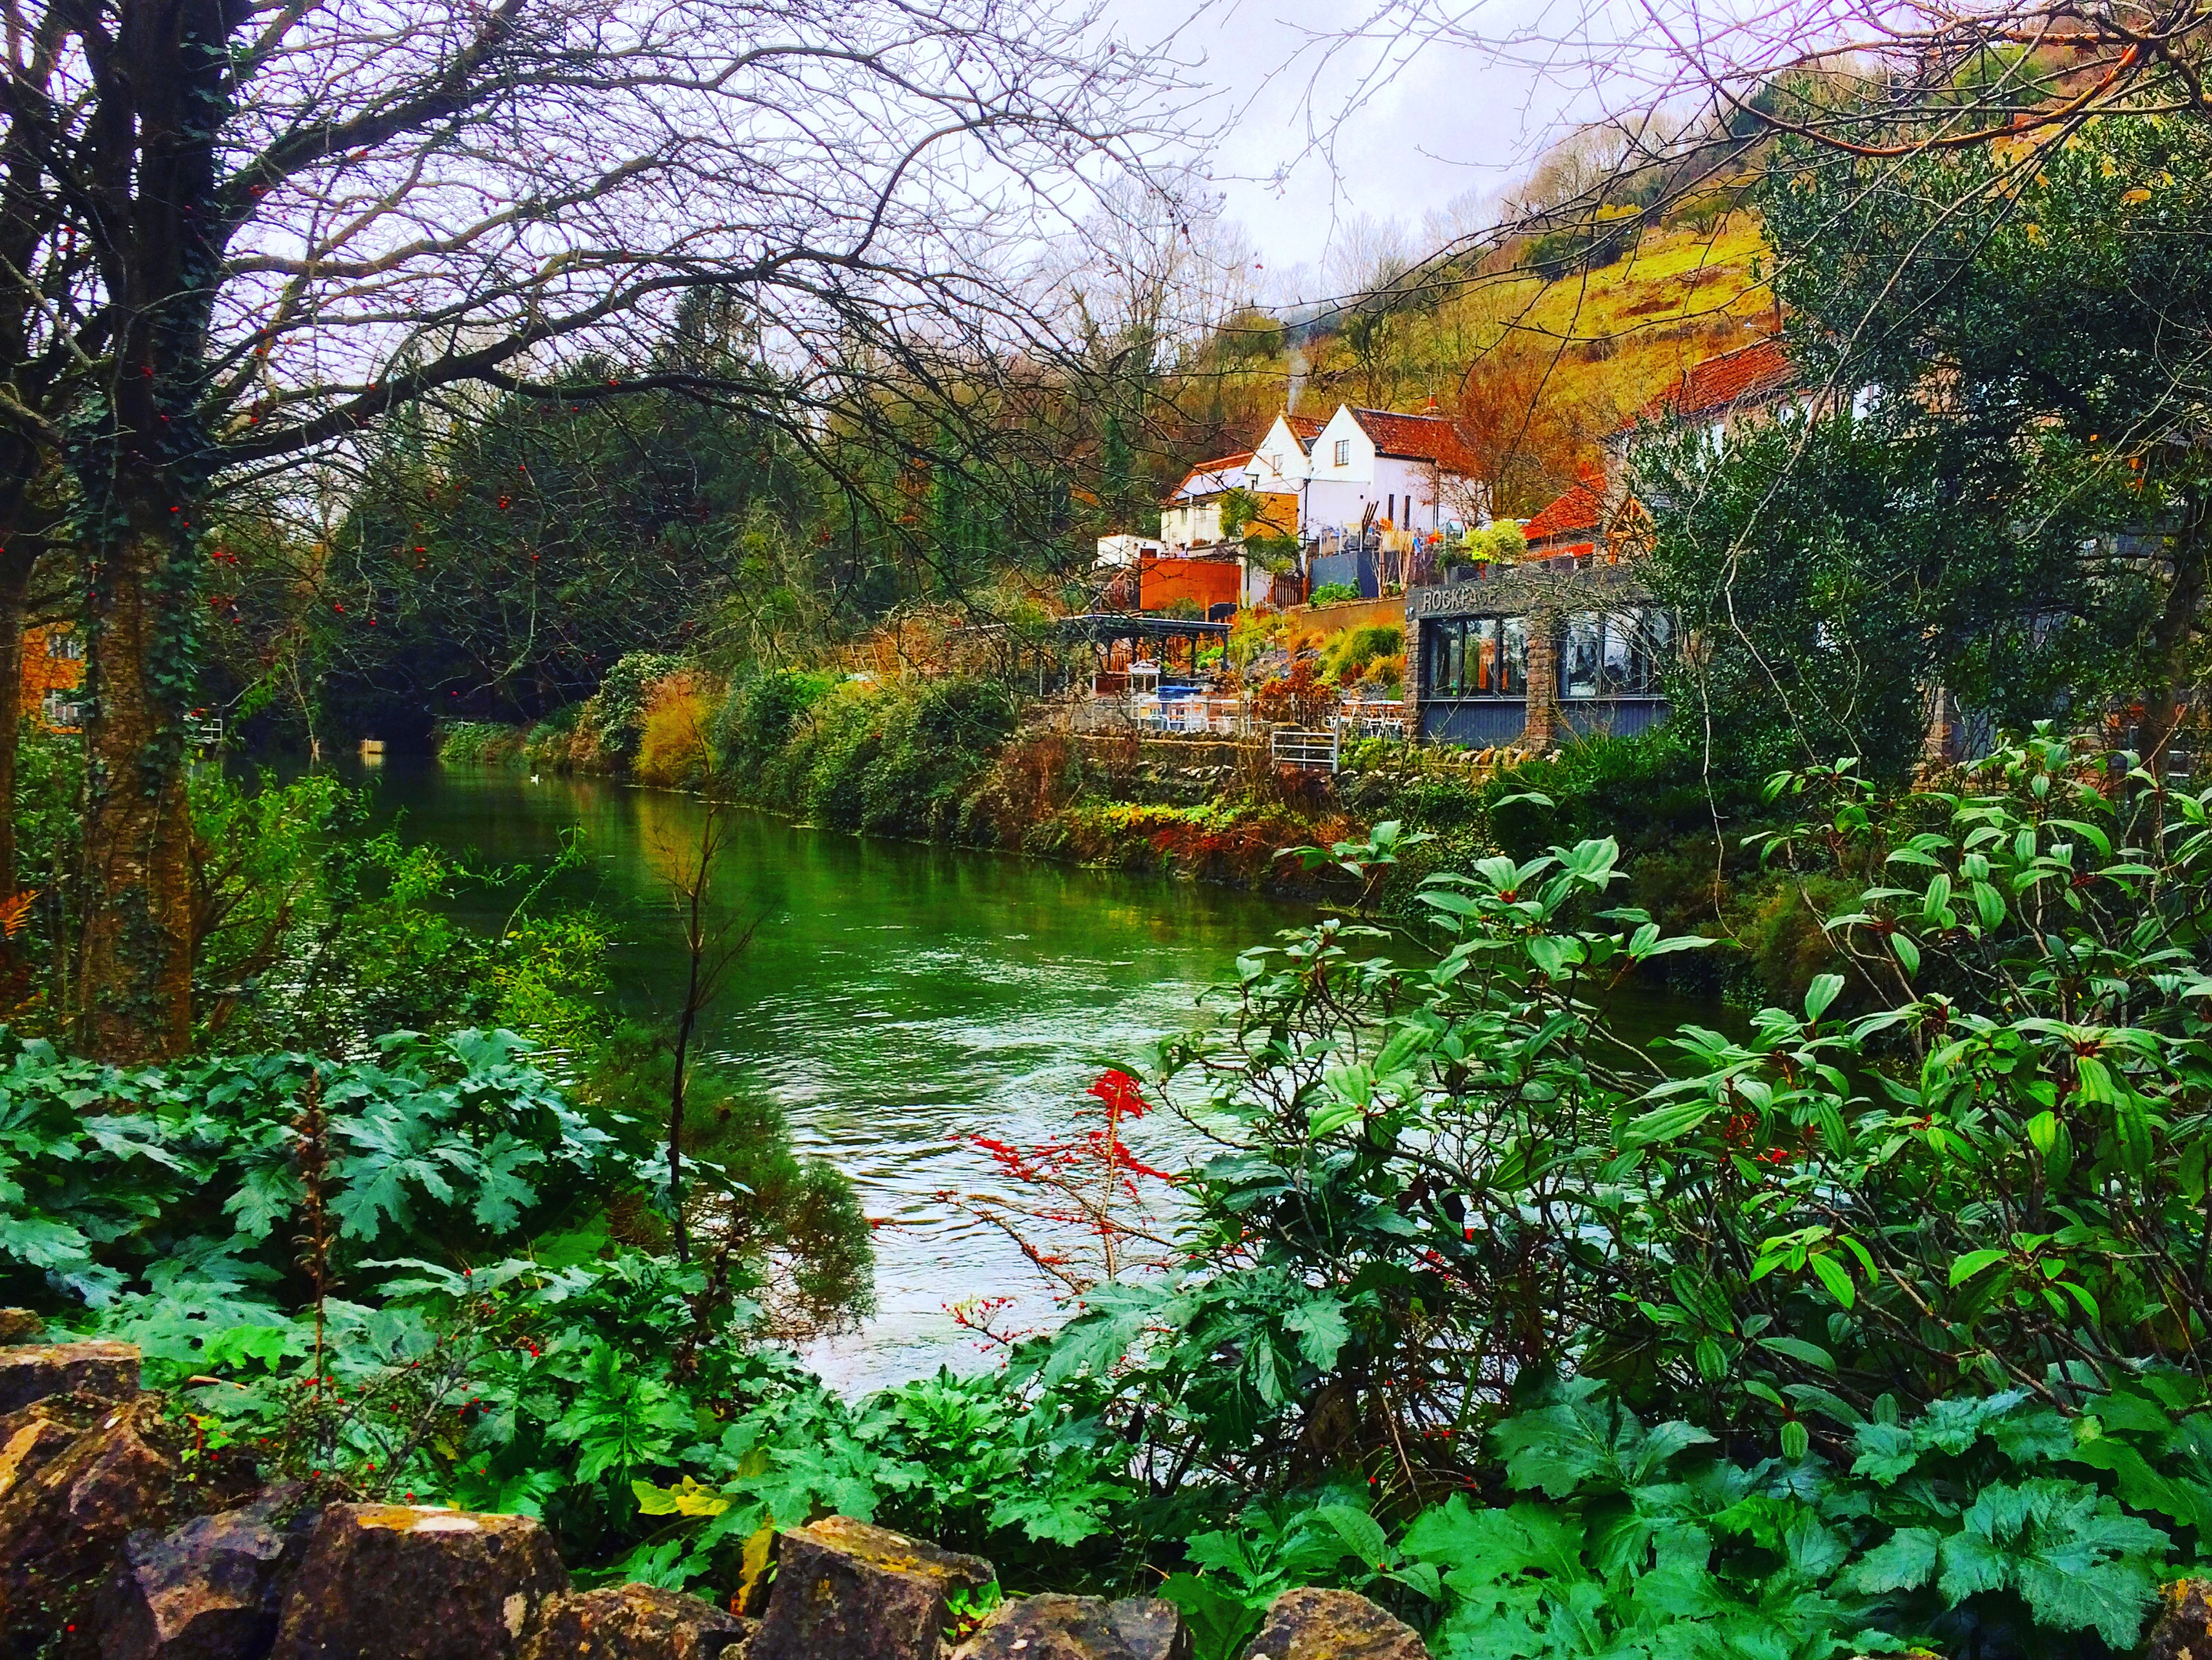 How to Spend a Weekend in Cheddar Gorge, Somerset